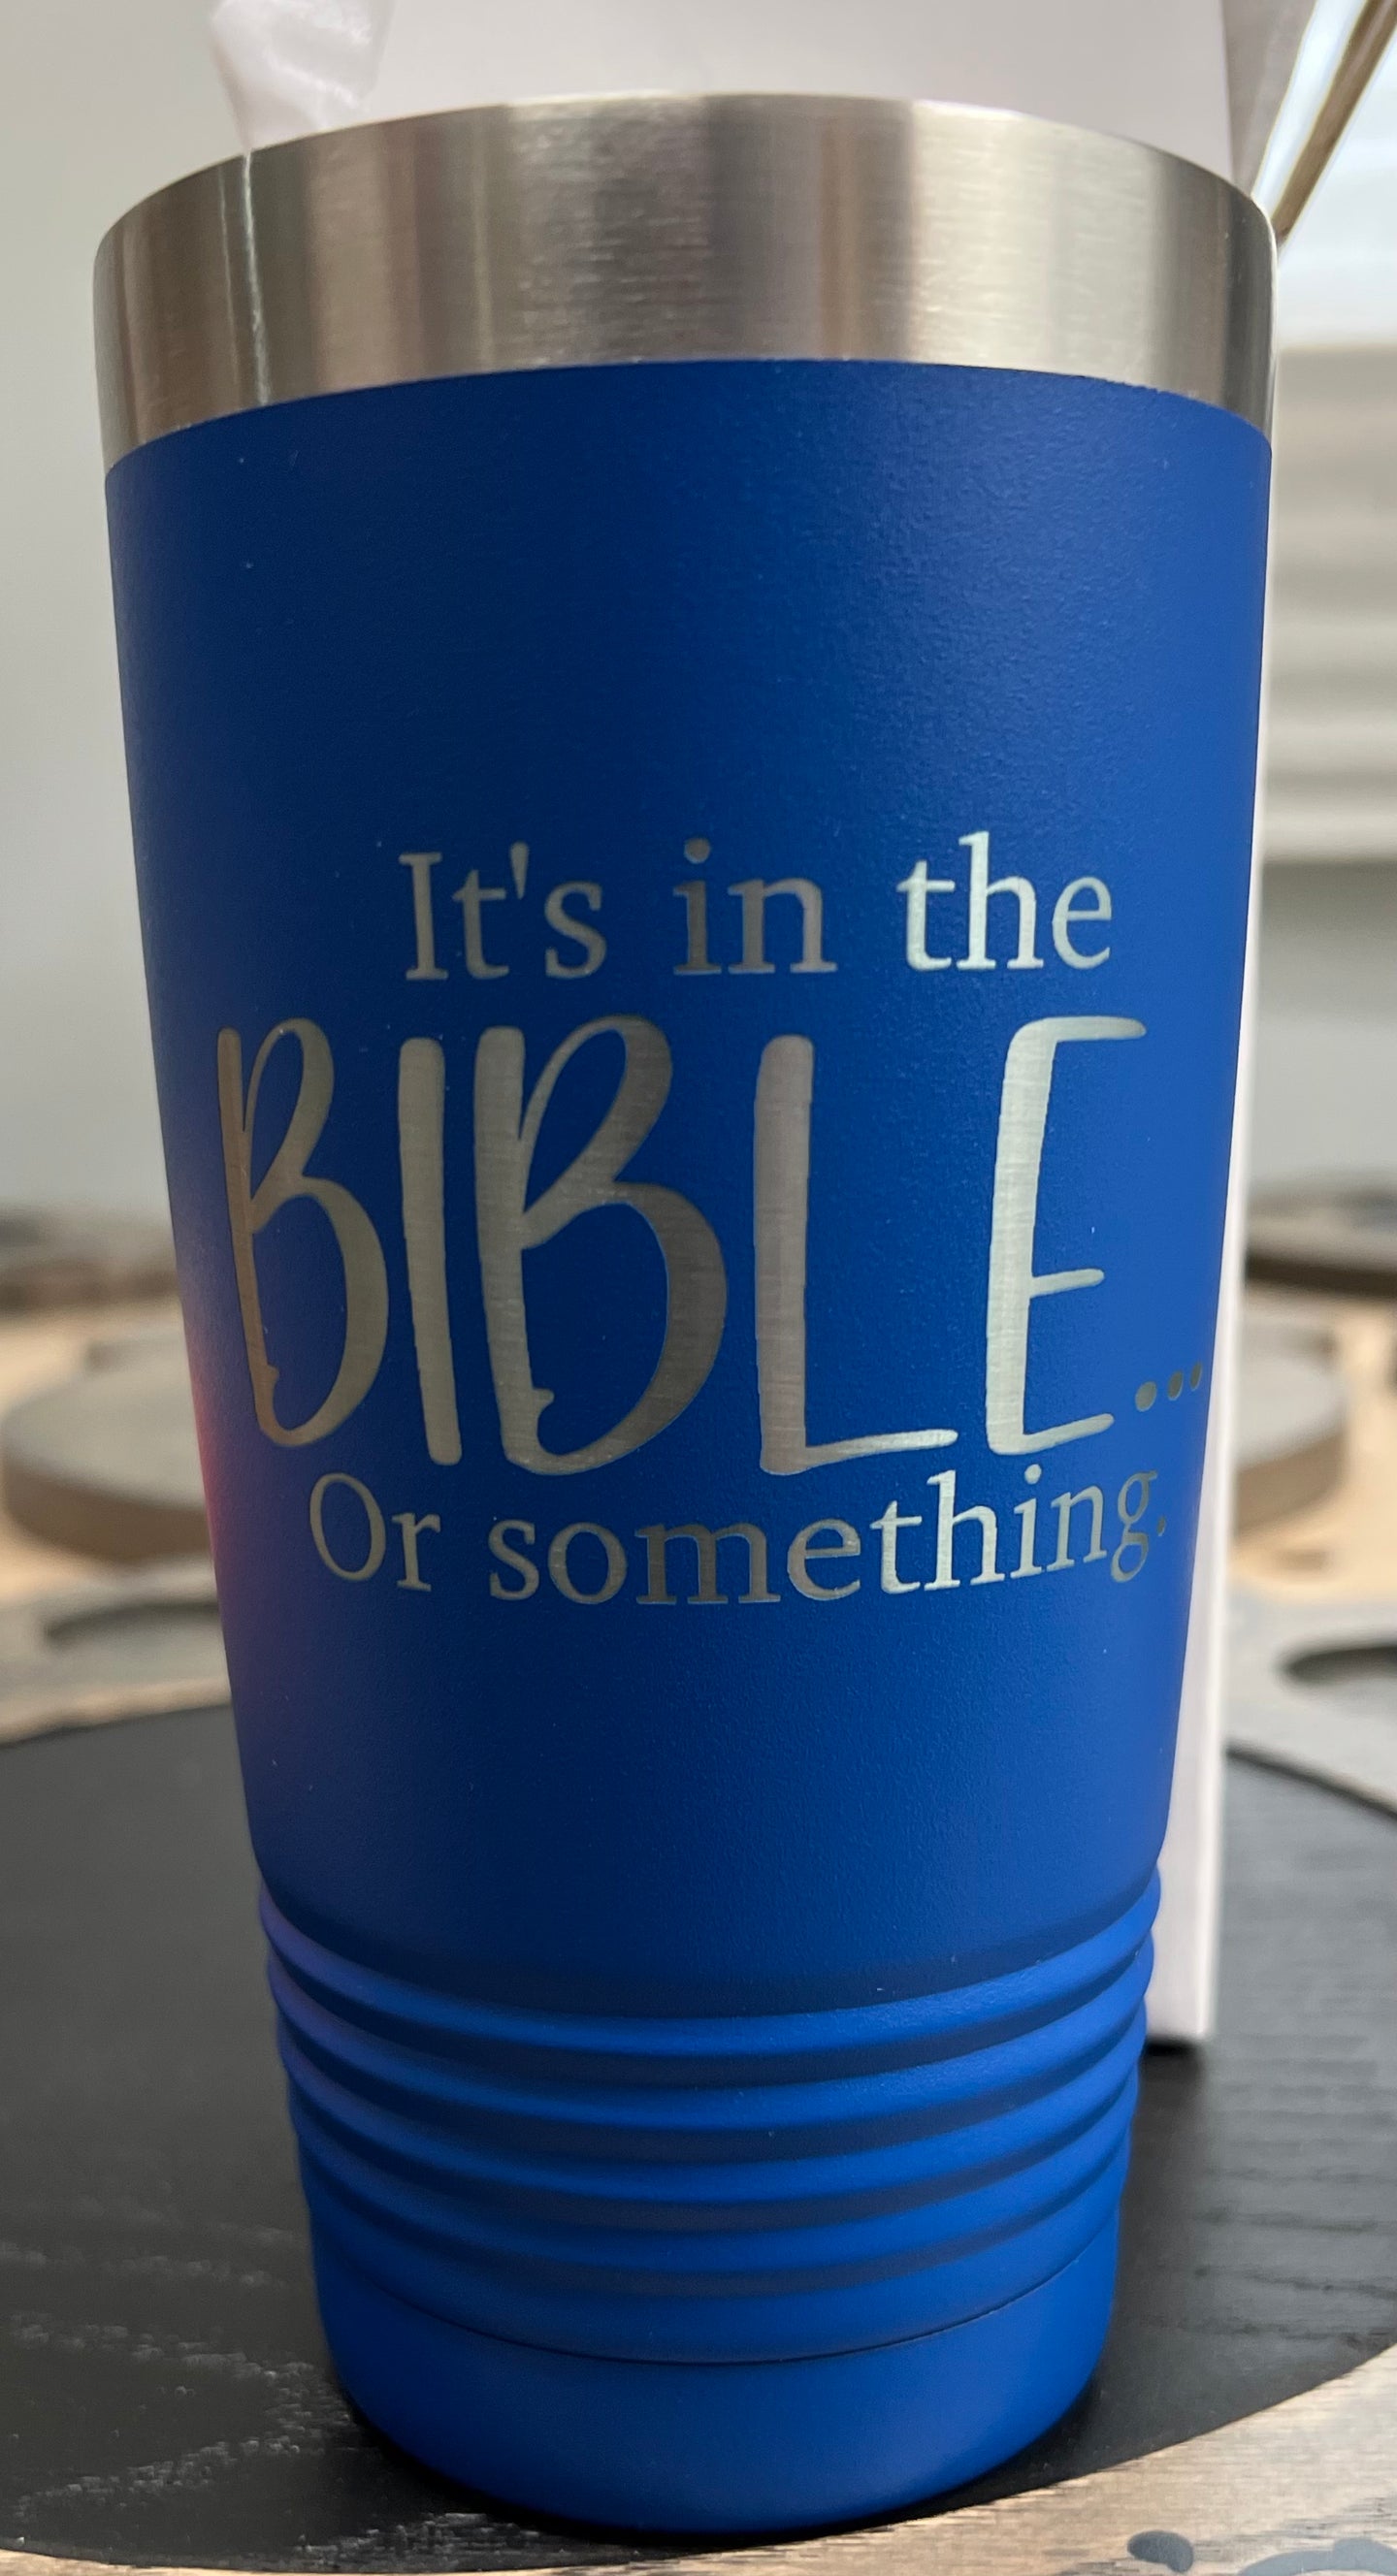 It's In the Bible Tumbler